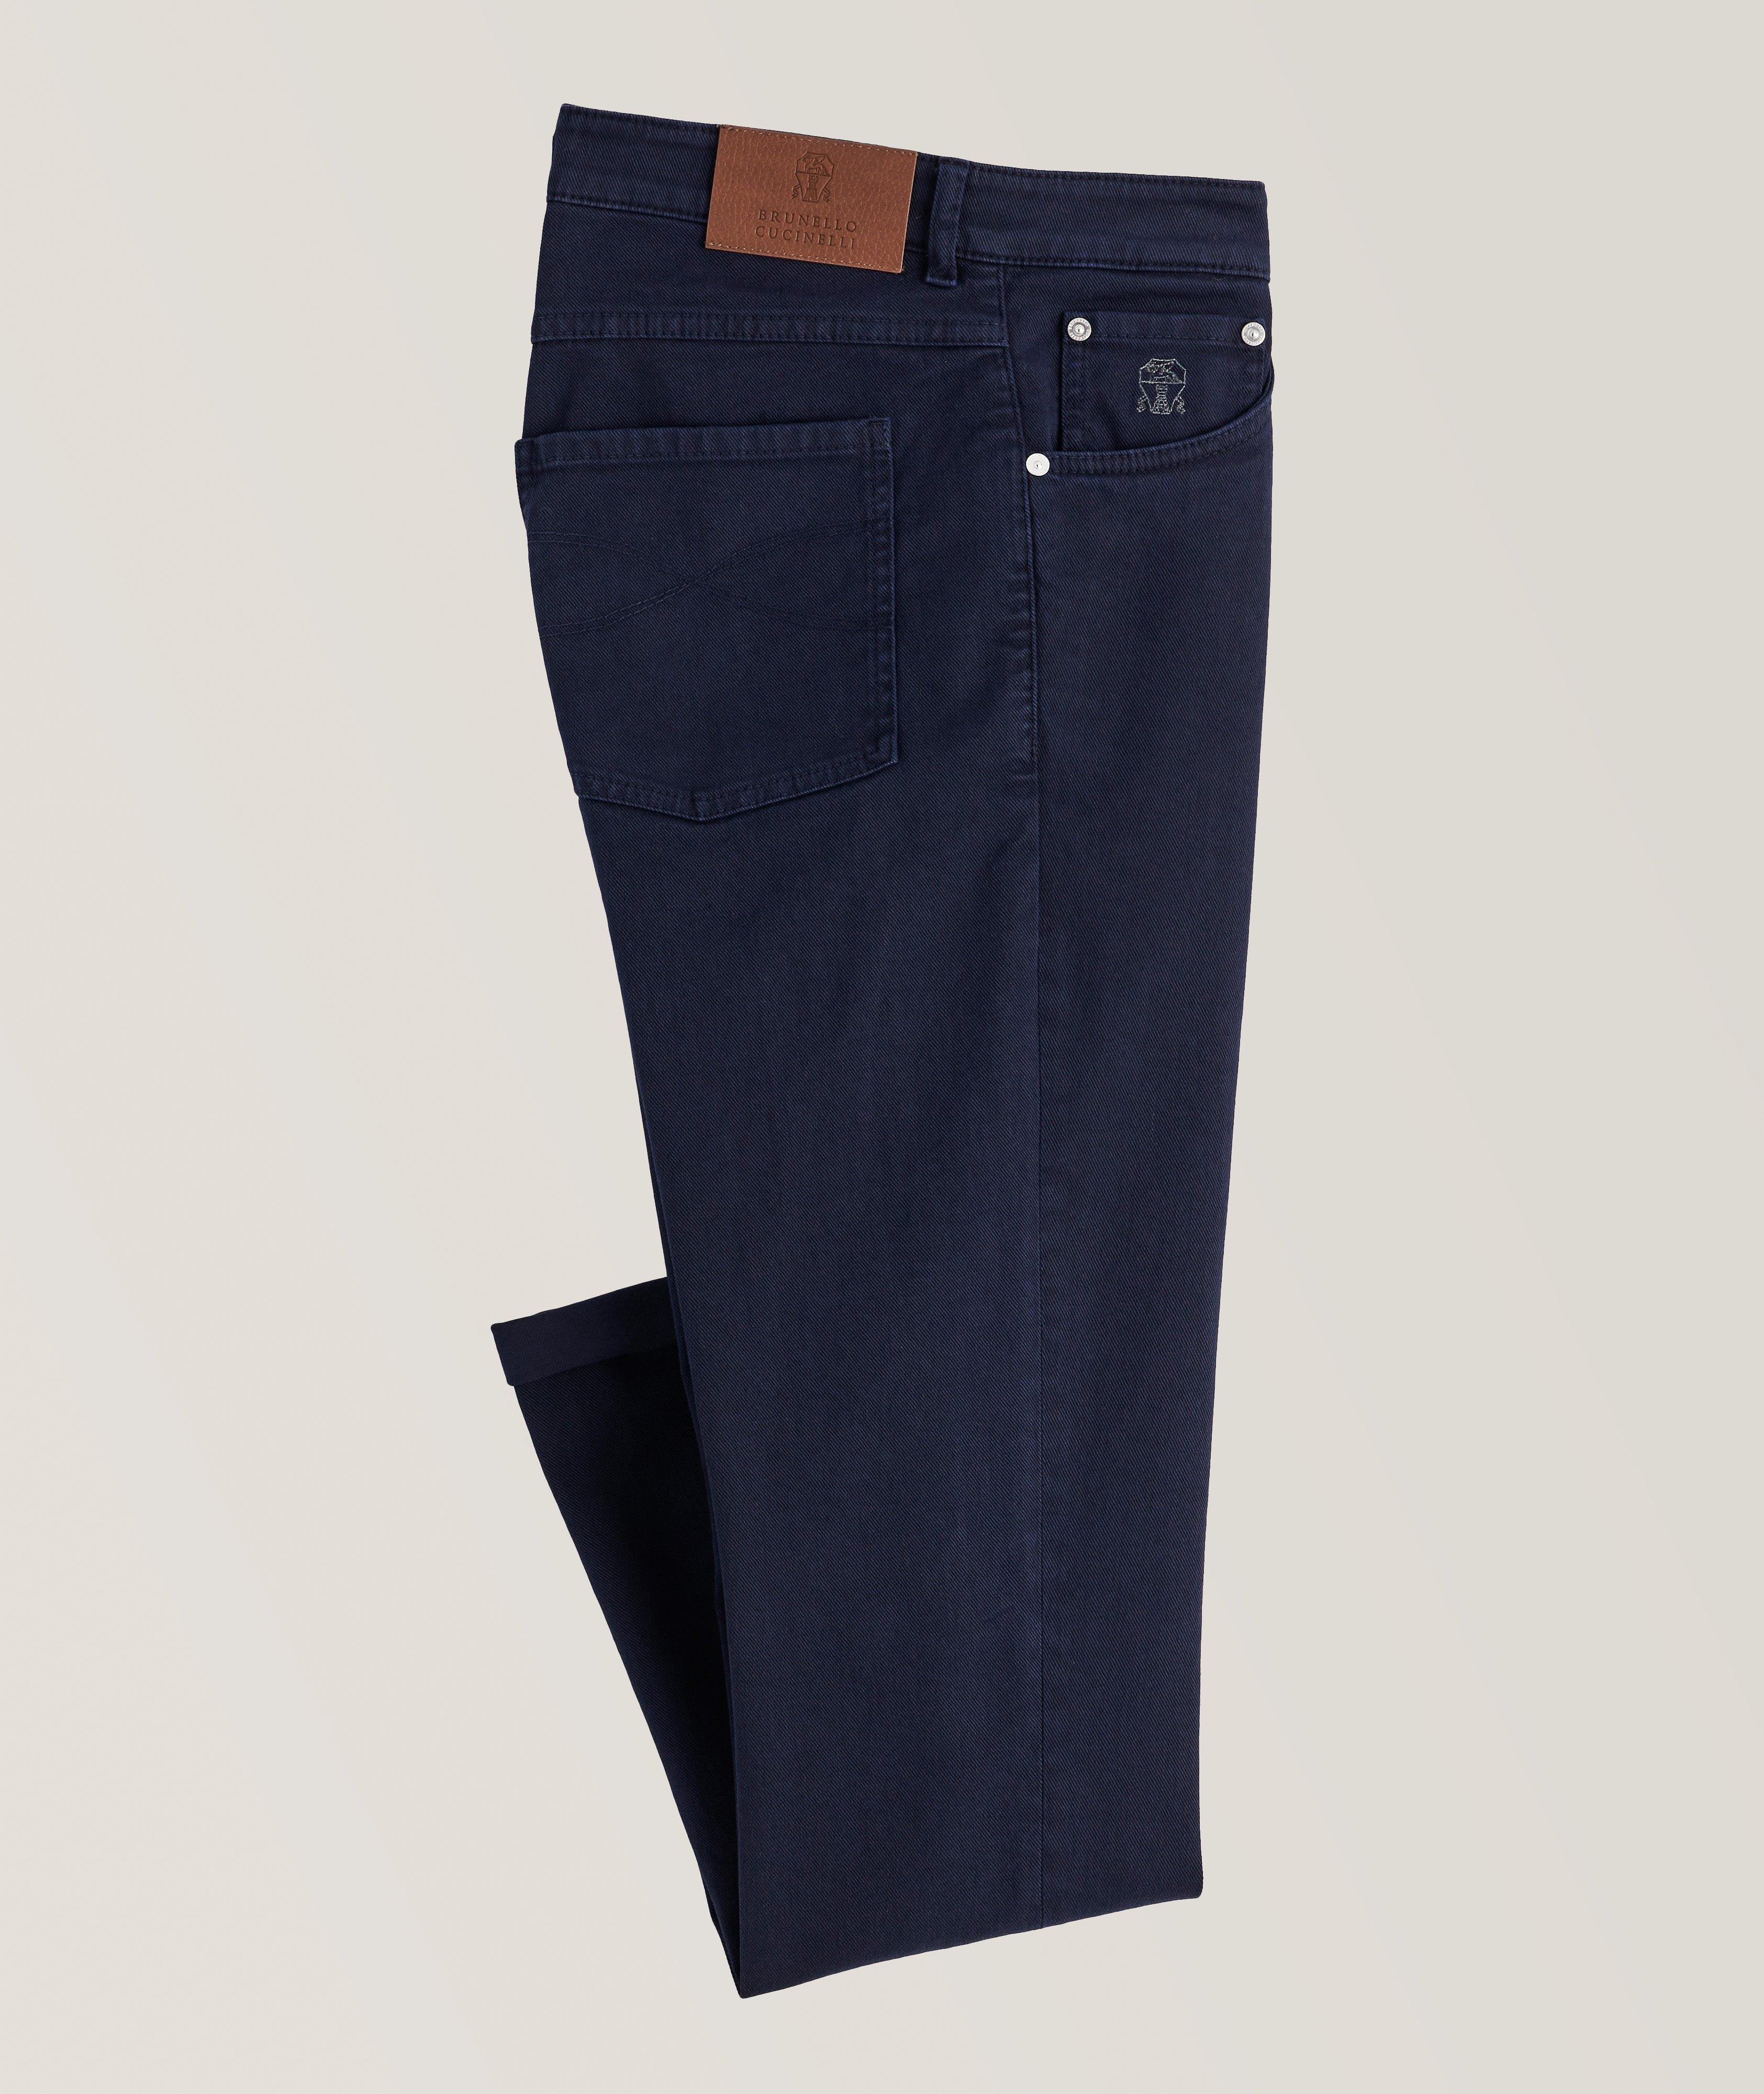 Skinny Fit Stretch-Cotton Jeans image 0